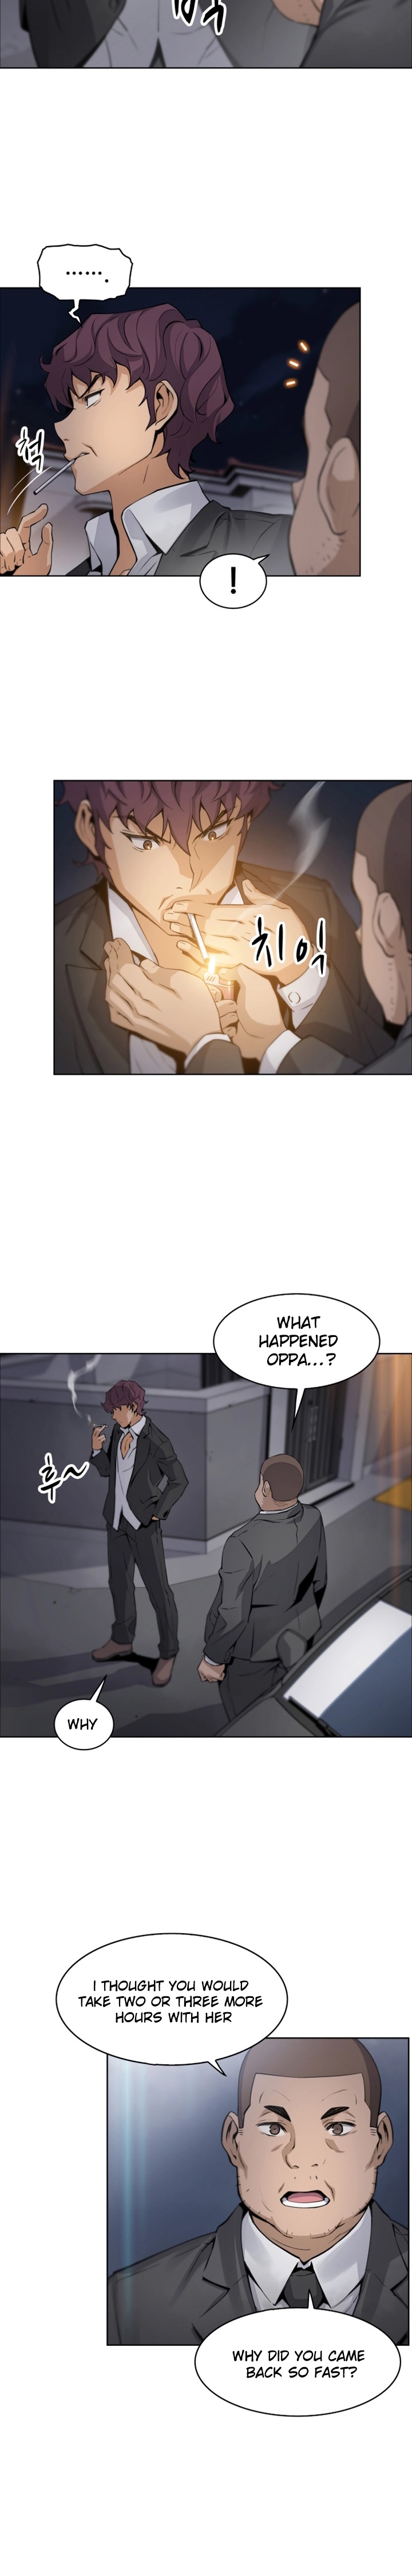 Housekeeper Manhwa - Chapter 13 Page 16